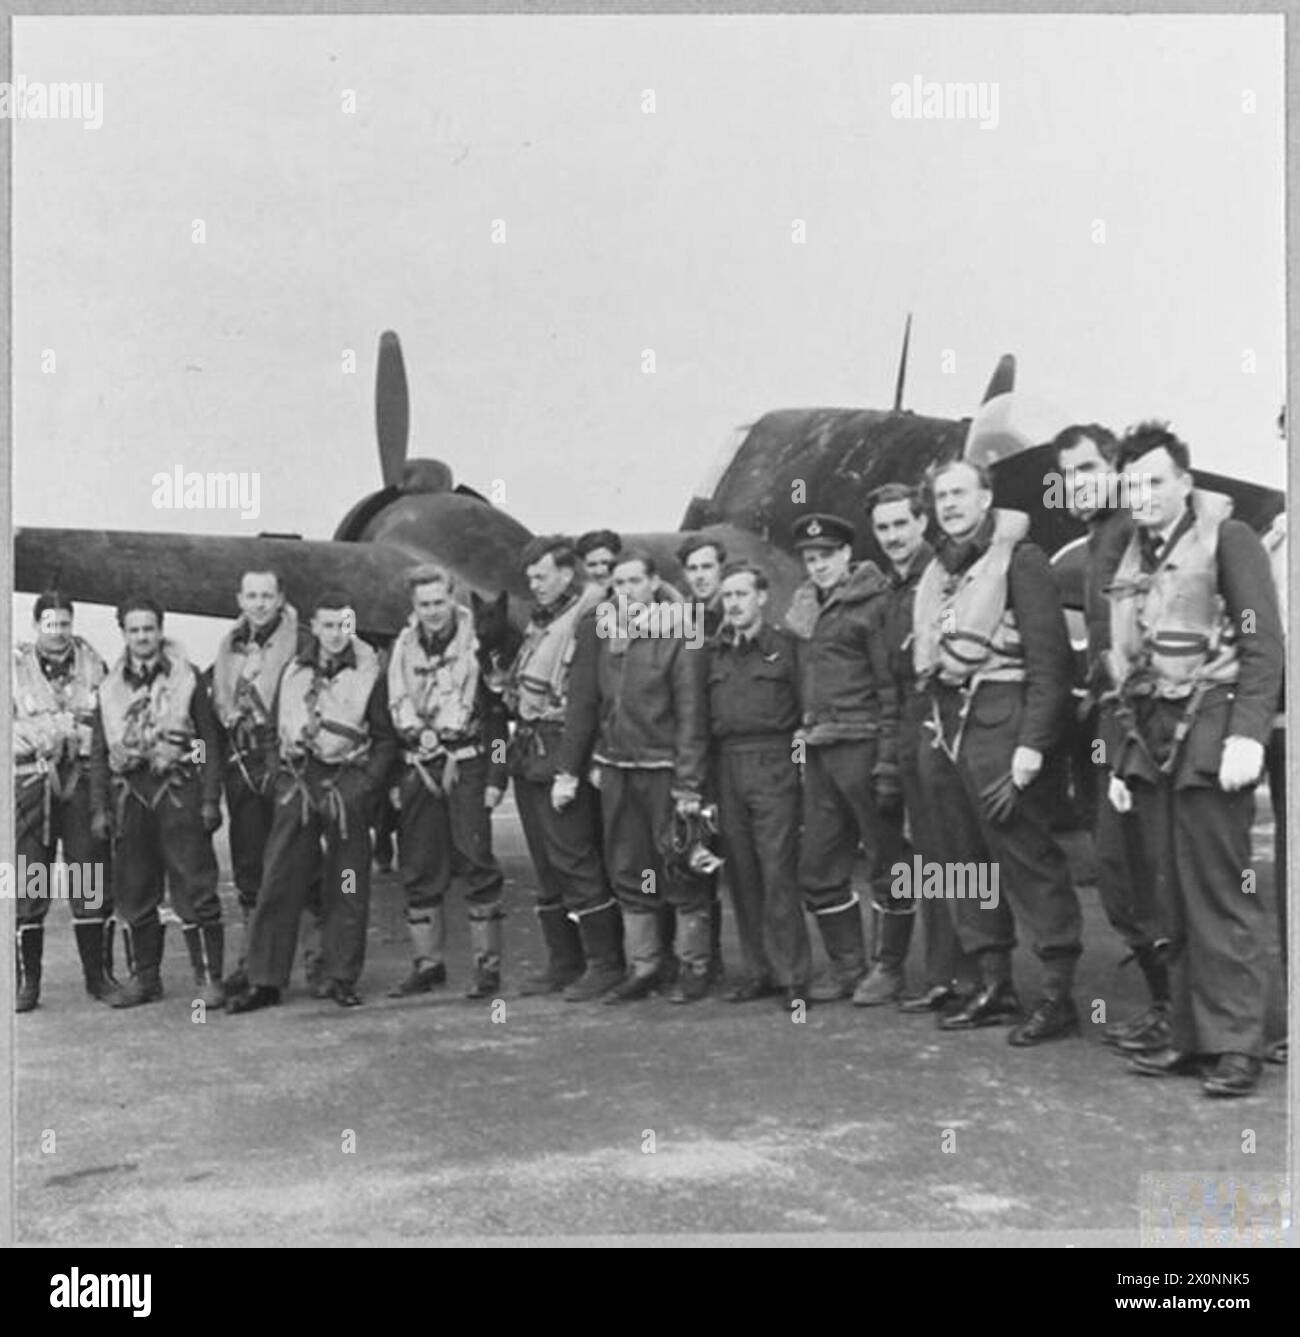 PERSONNEL OF R.A.F. NIGHTFIGHTER SQUADRON COMBATING 'BAEDEKER' RAIDS. - Beaufighters powered with Hercules engines are used with a night fighter squadron which has been engaged in combating enemy aircraft in the 'Baedeker' raids on this country. Pilots and observers of the squadron, many of them wearing the ribbon of the D.F.C. [LEFT] Sergeant Scobie; Pilot Officer H. Duncan; Sergeant Georgeson; Sergeant I. Boyd; SergeantPeacock Jake and Flight Lieutenant A.J. Clegg, DFC; Pilot Officer J. McD.Craig; Flight Lieutenant H.v. Ellis; Sergeant A.Webber; Sergeant Clarke; Pilot Officer H.W. Yielder; S Stock Photo